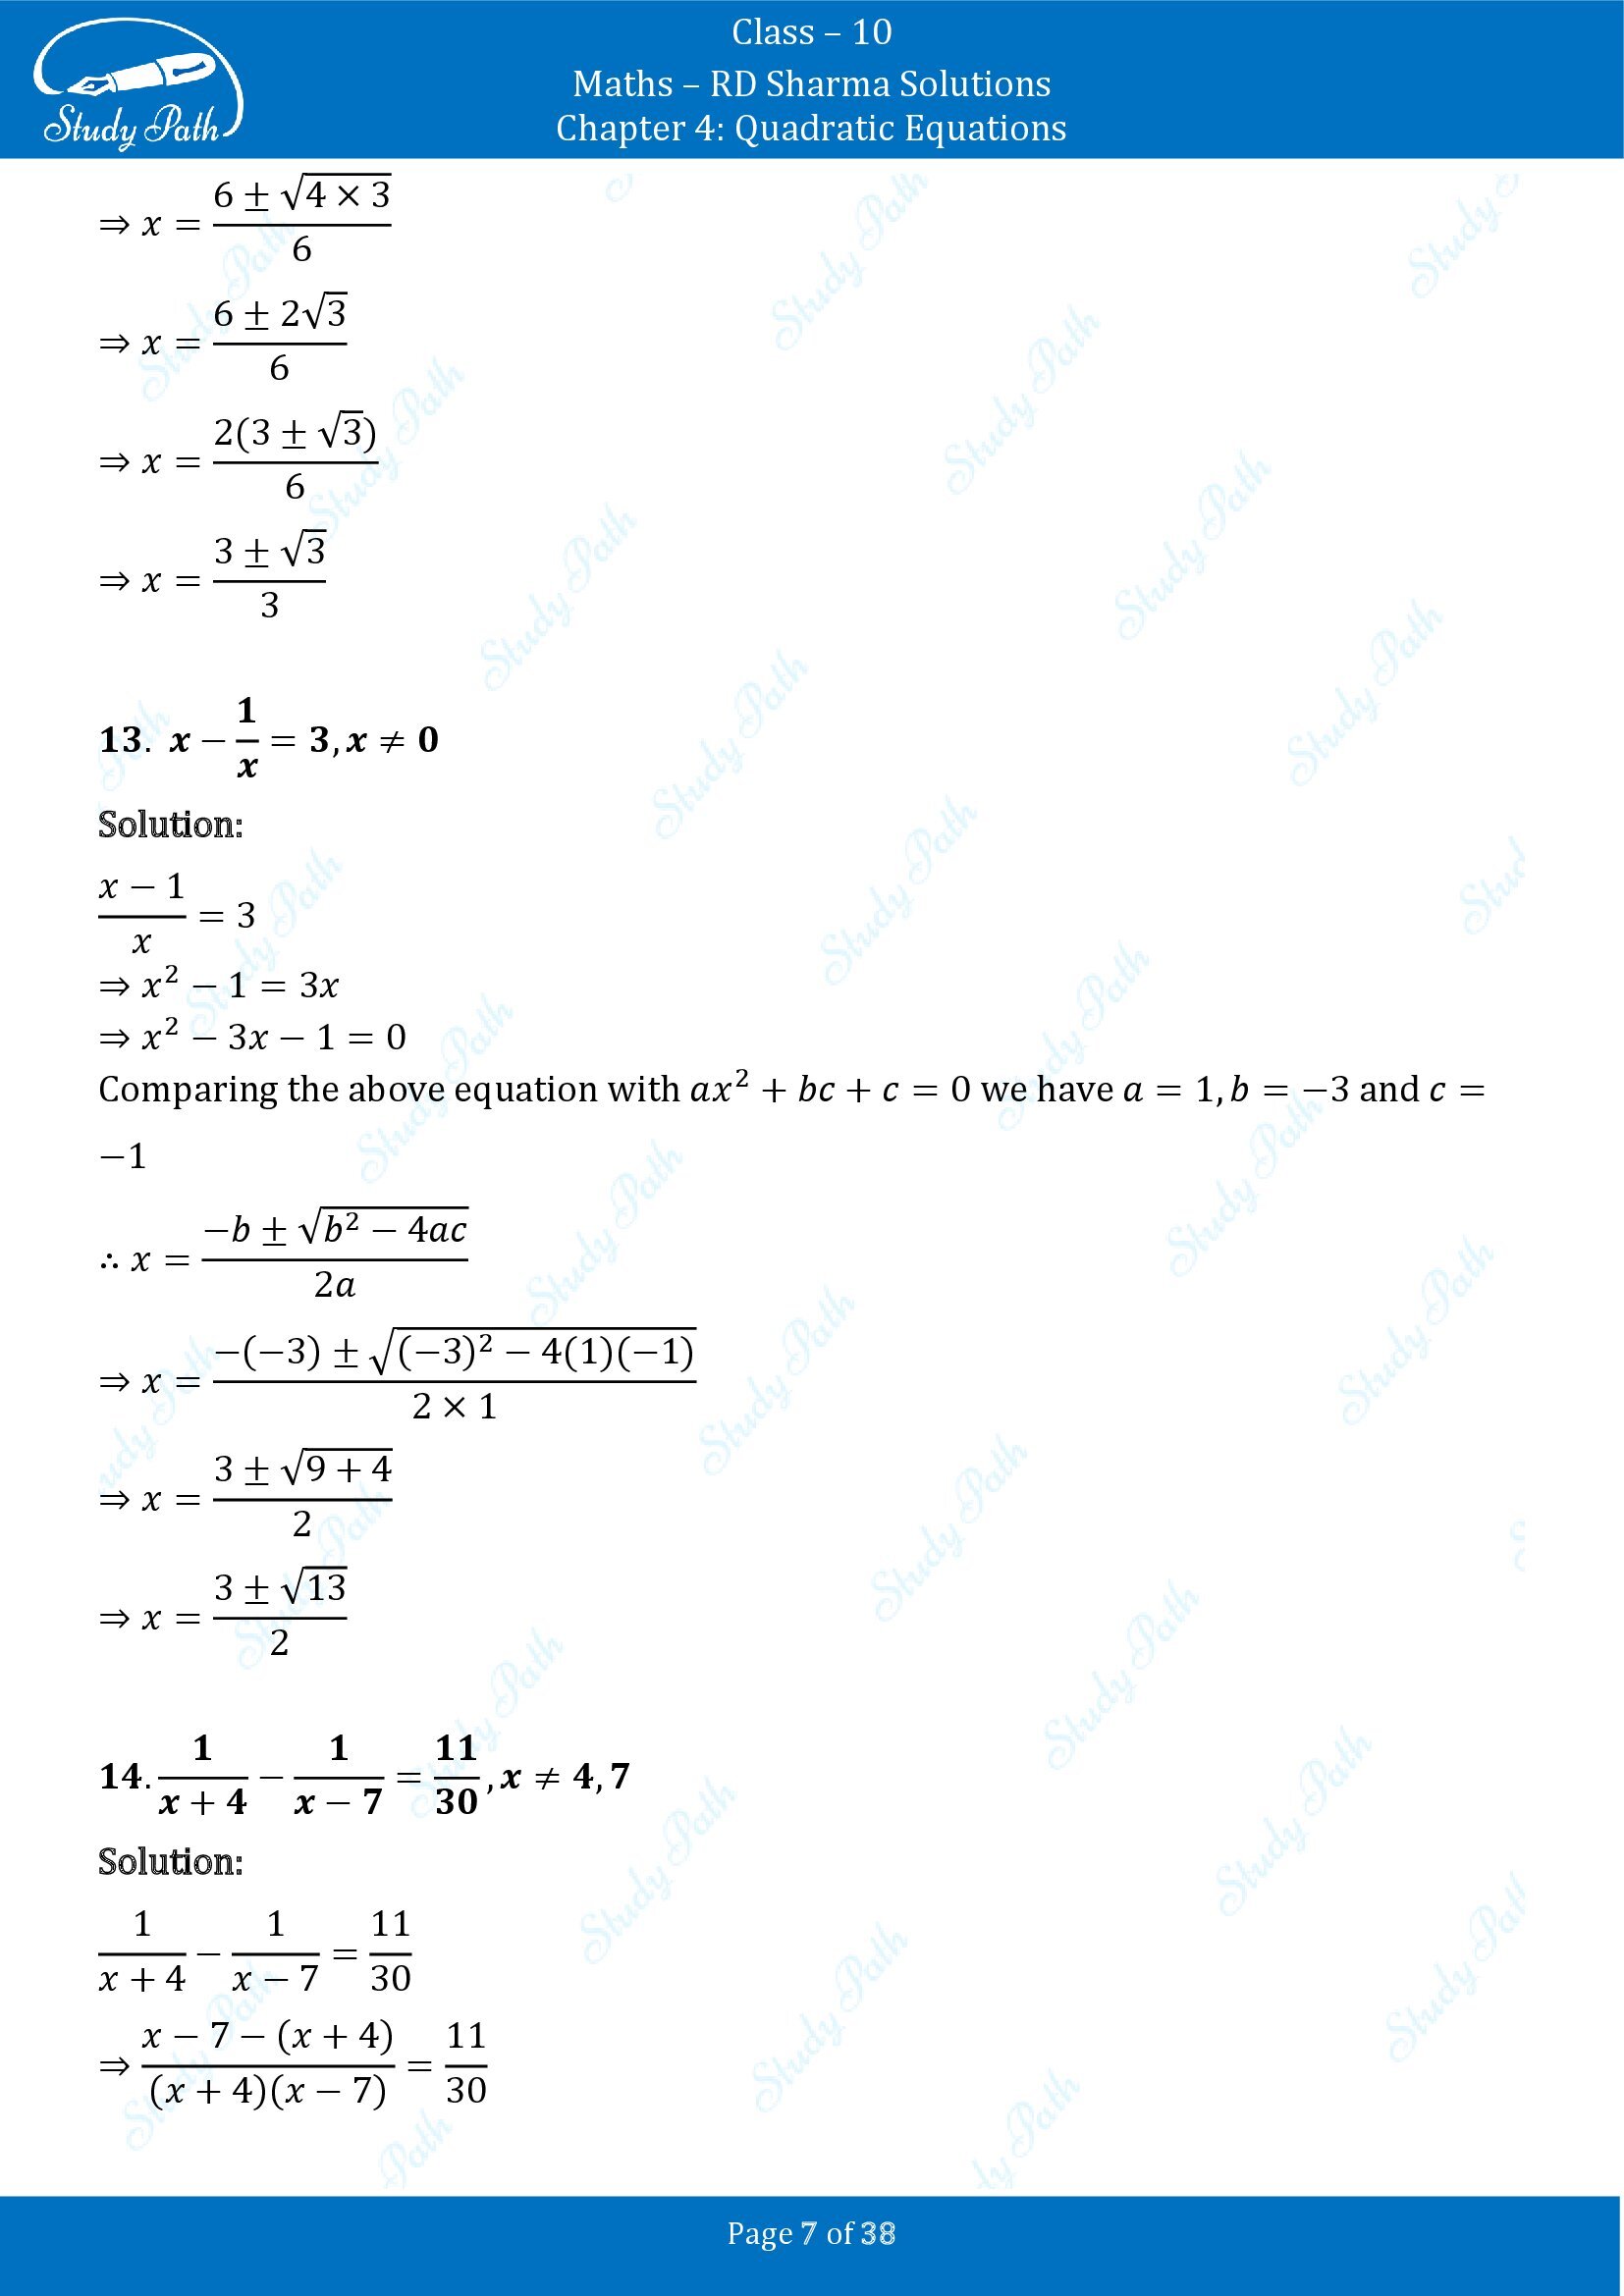 RD Sharma Solutions Class 10 Chapter 4 Quadratic Equations Exercise 4.3 00007